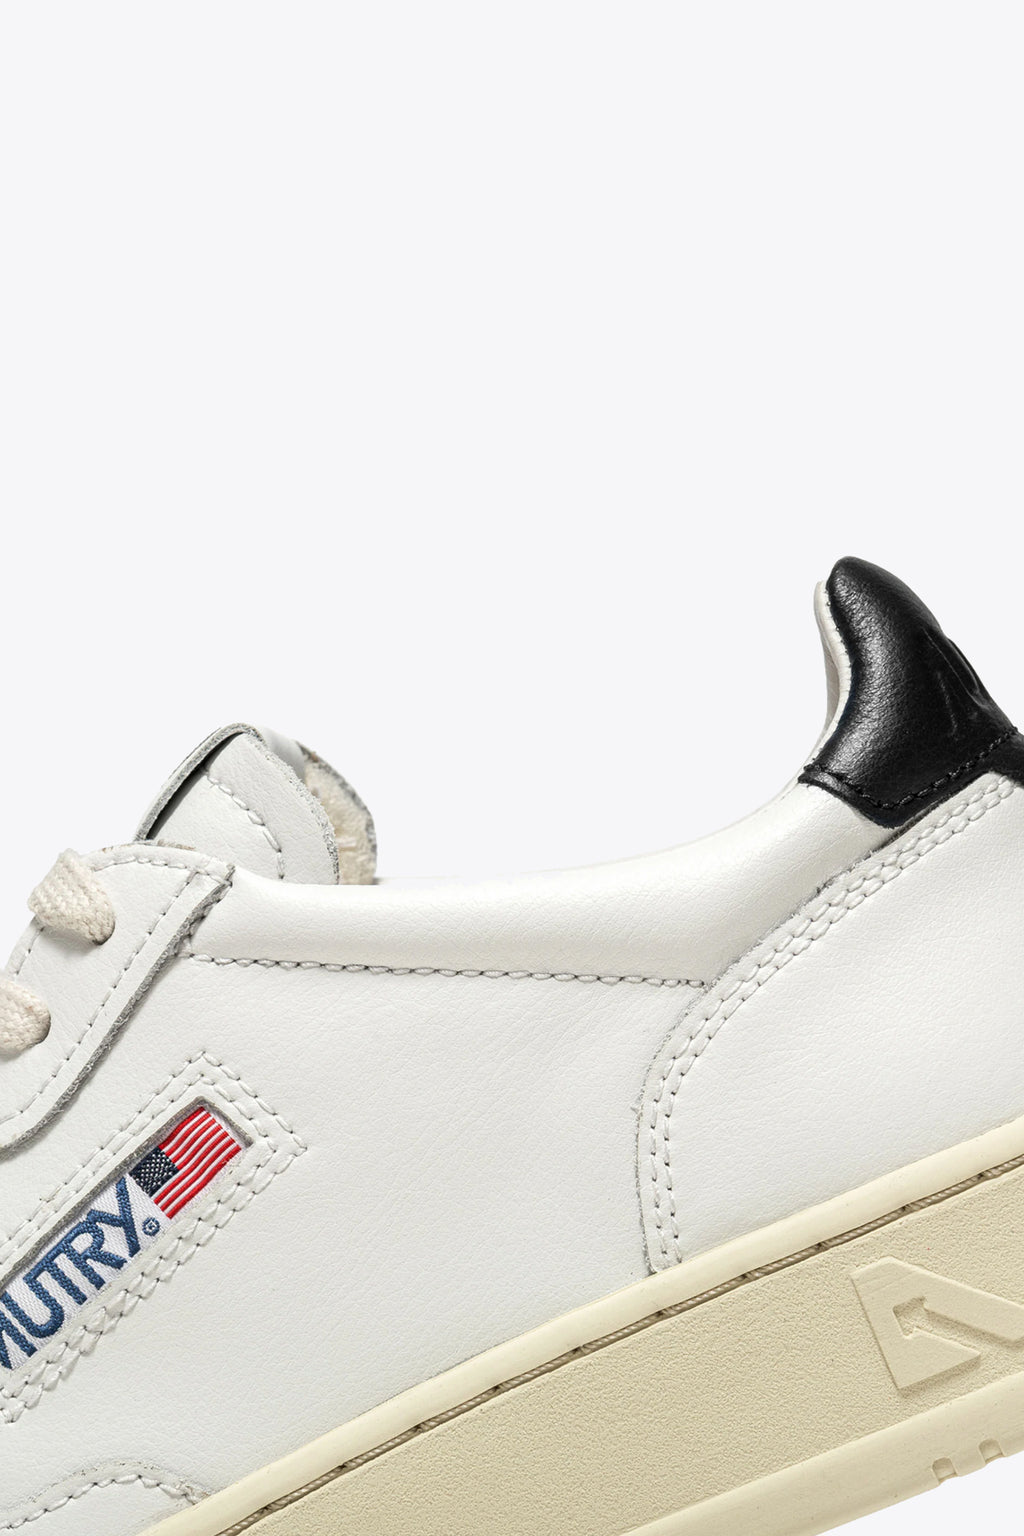 alt-image__White-leather-low-sneaker-with-black-tab---Medalist